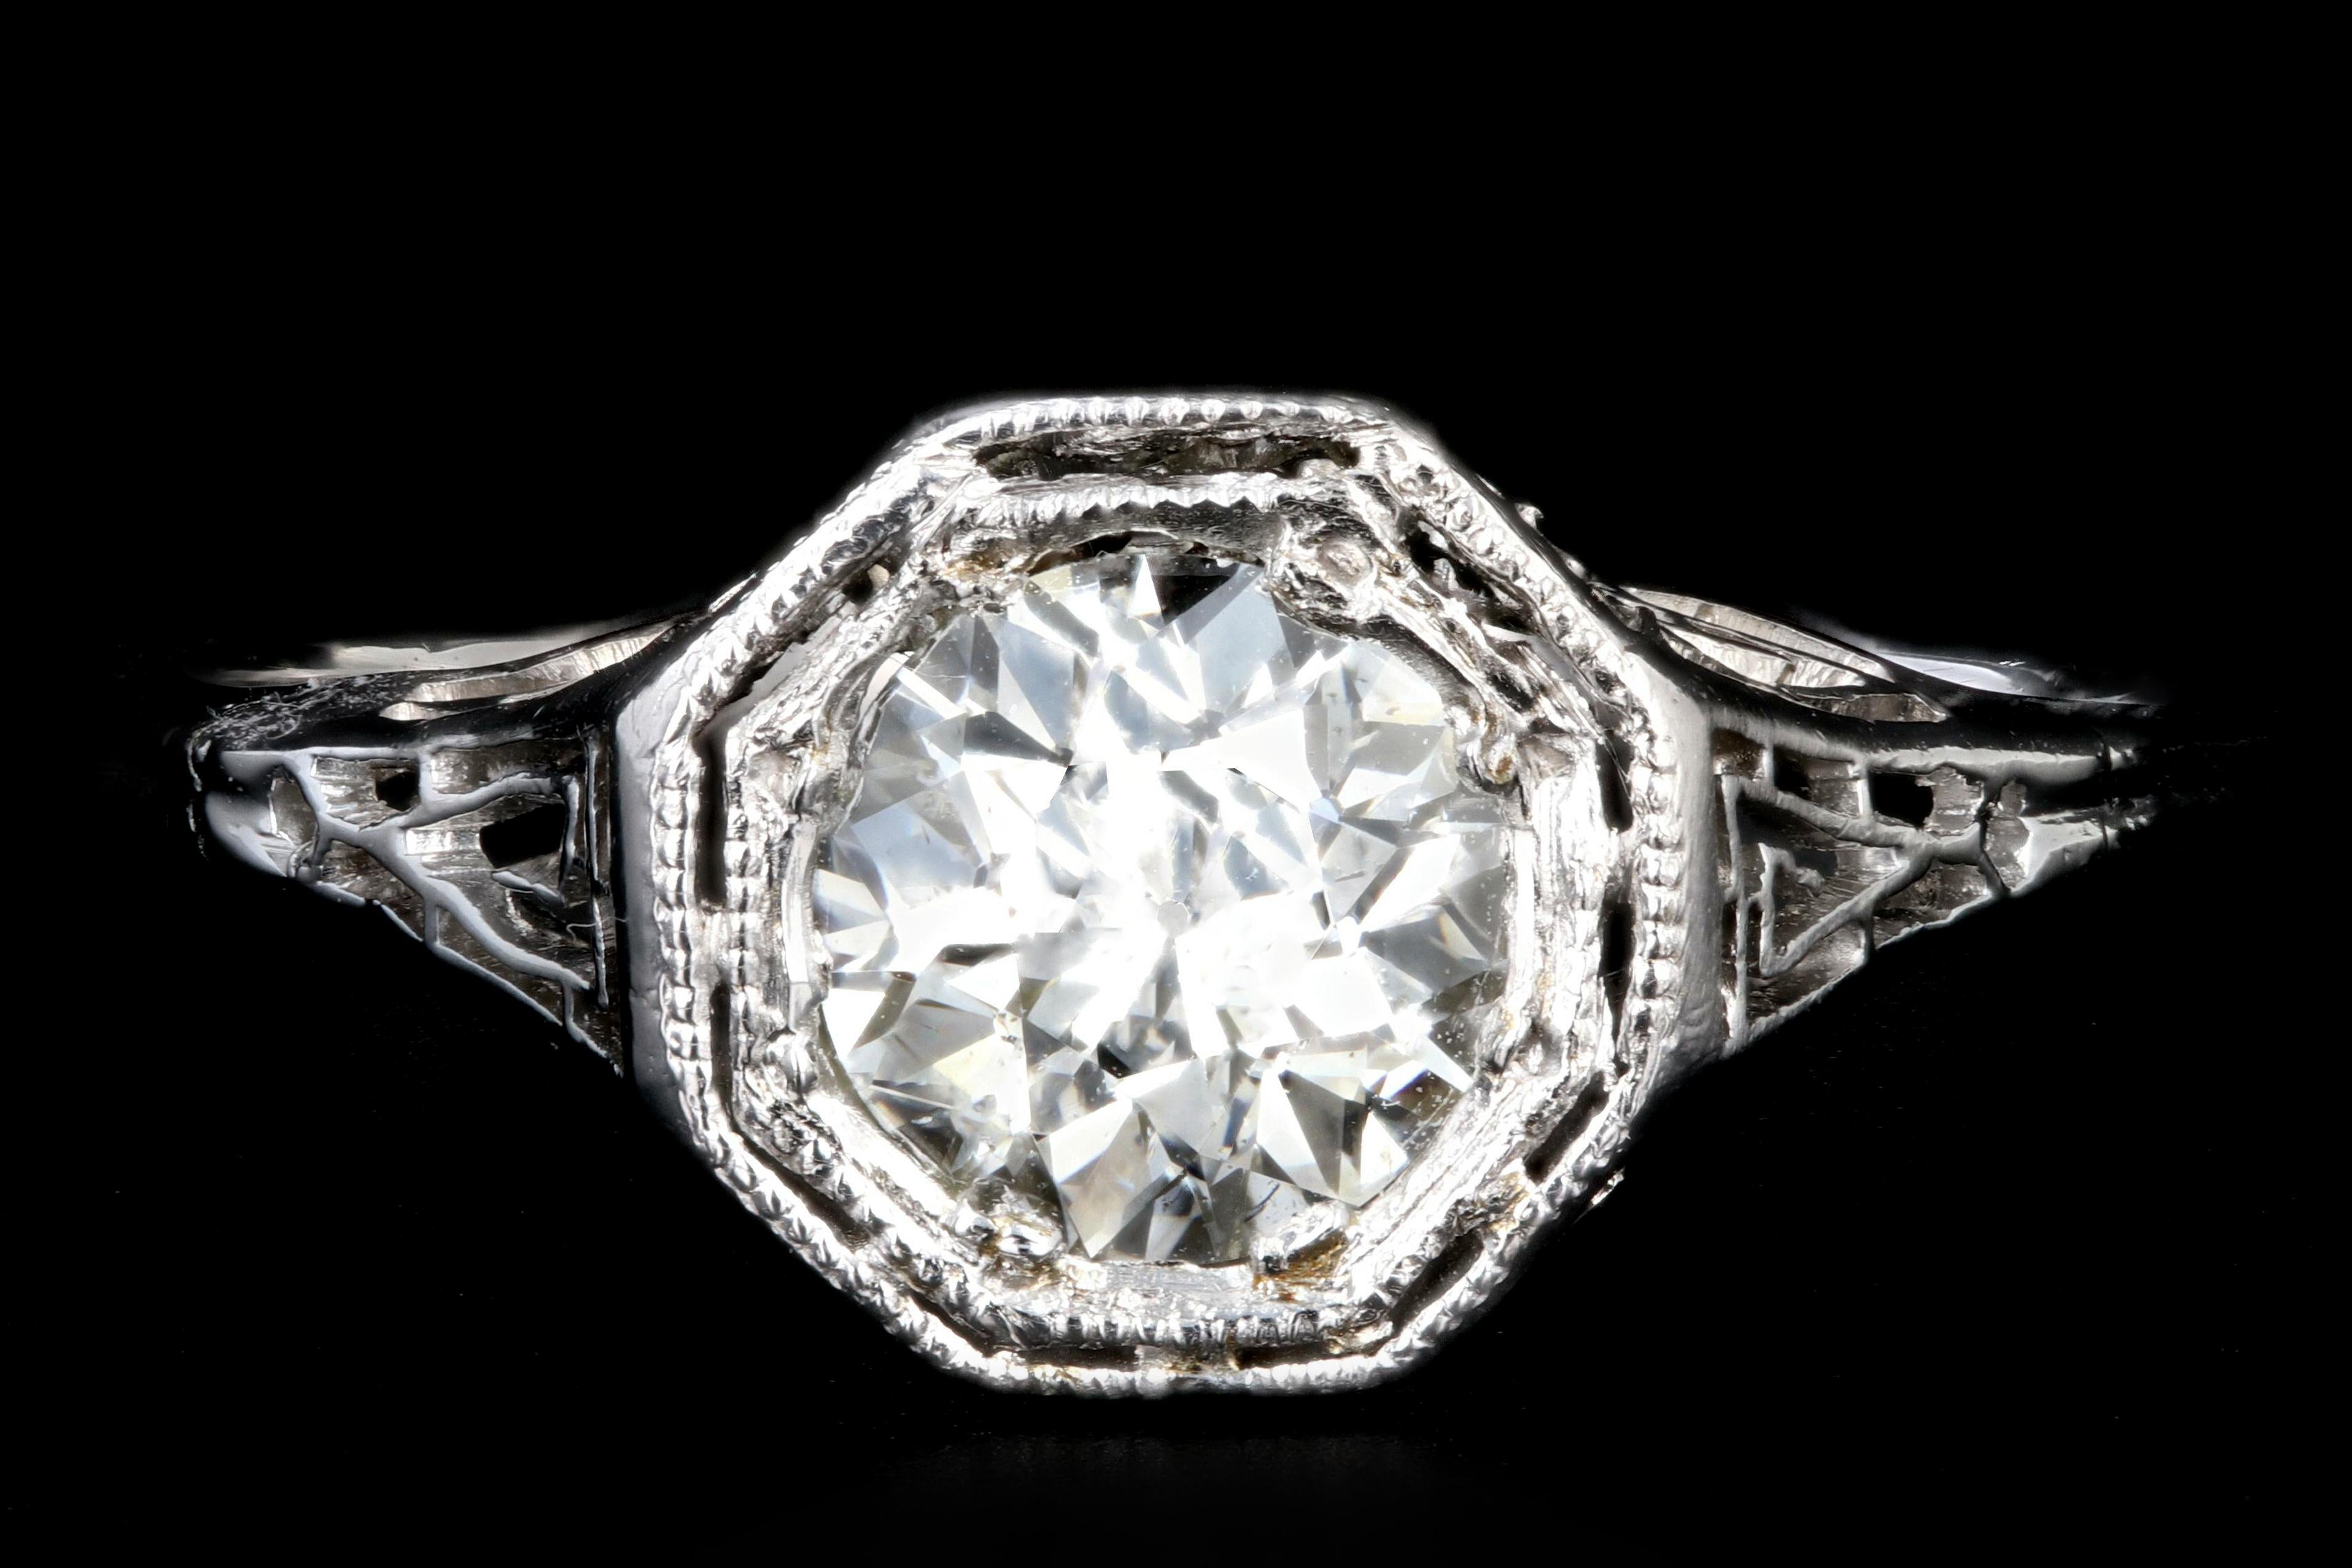 Era: Art Deco

Composition: Platinum

Primary Stone:Old European Cut Diamond

Carat Weight: Approximately .85 Carats

Color: K

Clarity: SI2

Ring Weight: 1.2 DWT

Ring Size: 6.75